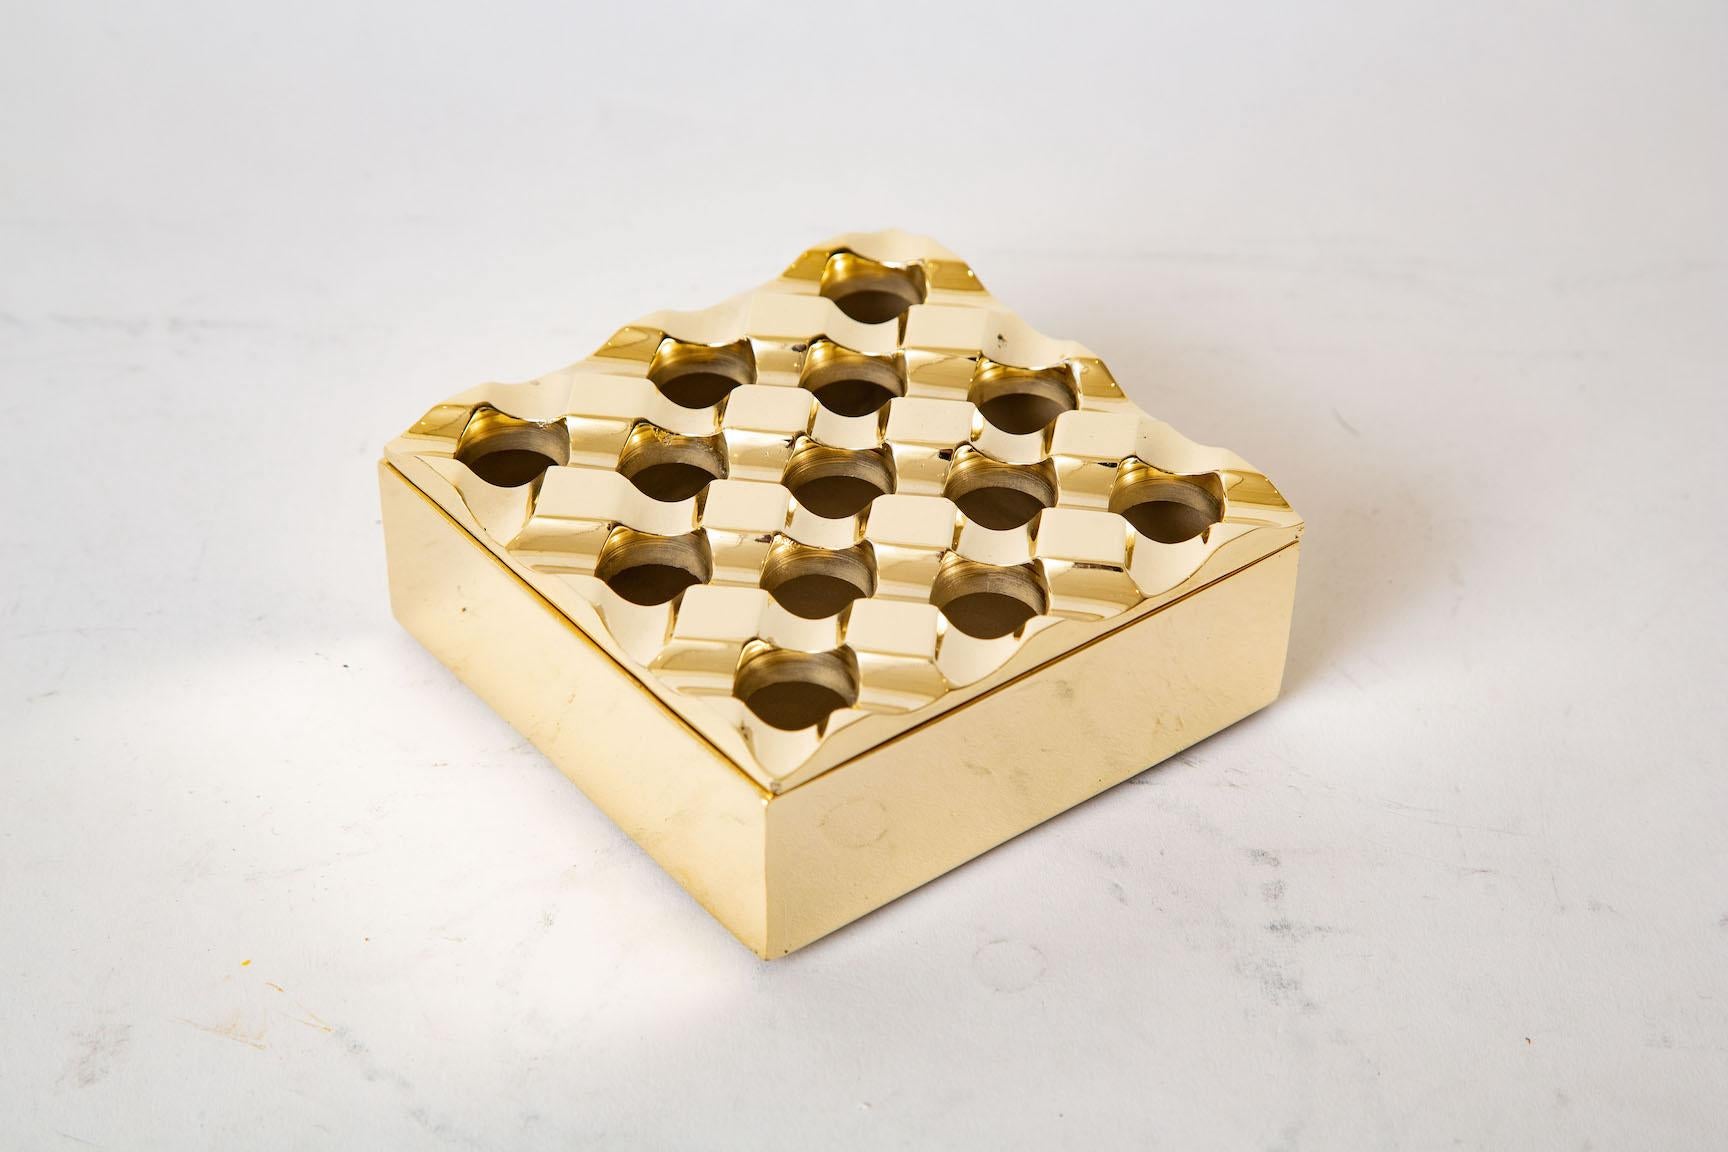 This geometric solid brass ashtray and or fabulous desk accessory for pens and pencils is designed by Backstrom Holger and Bo Ljungberg for Diverse Ting. It is from Sweden and from 1970. This square shape and great design was the earliest computer